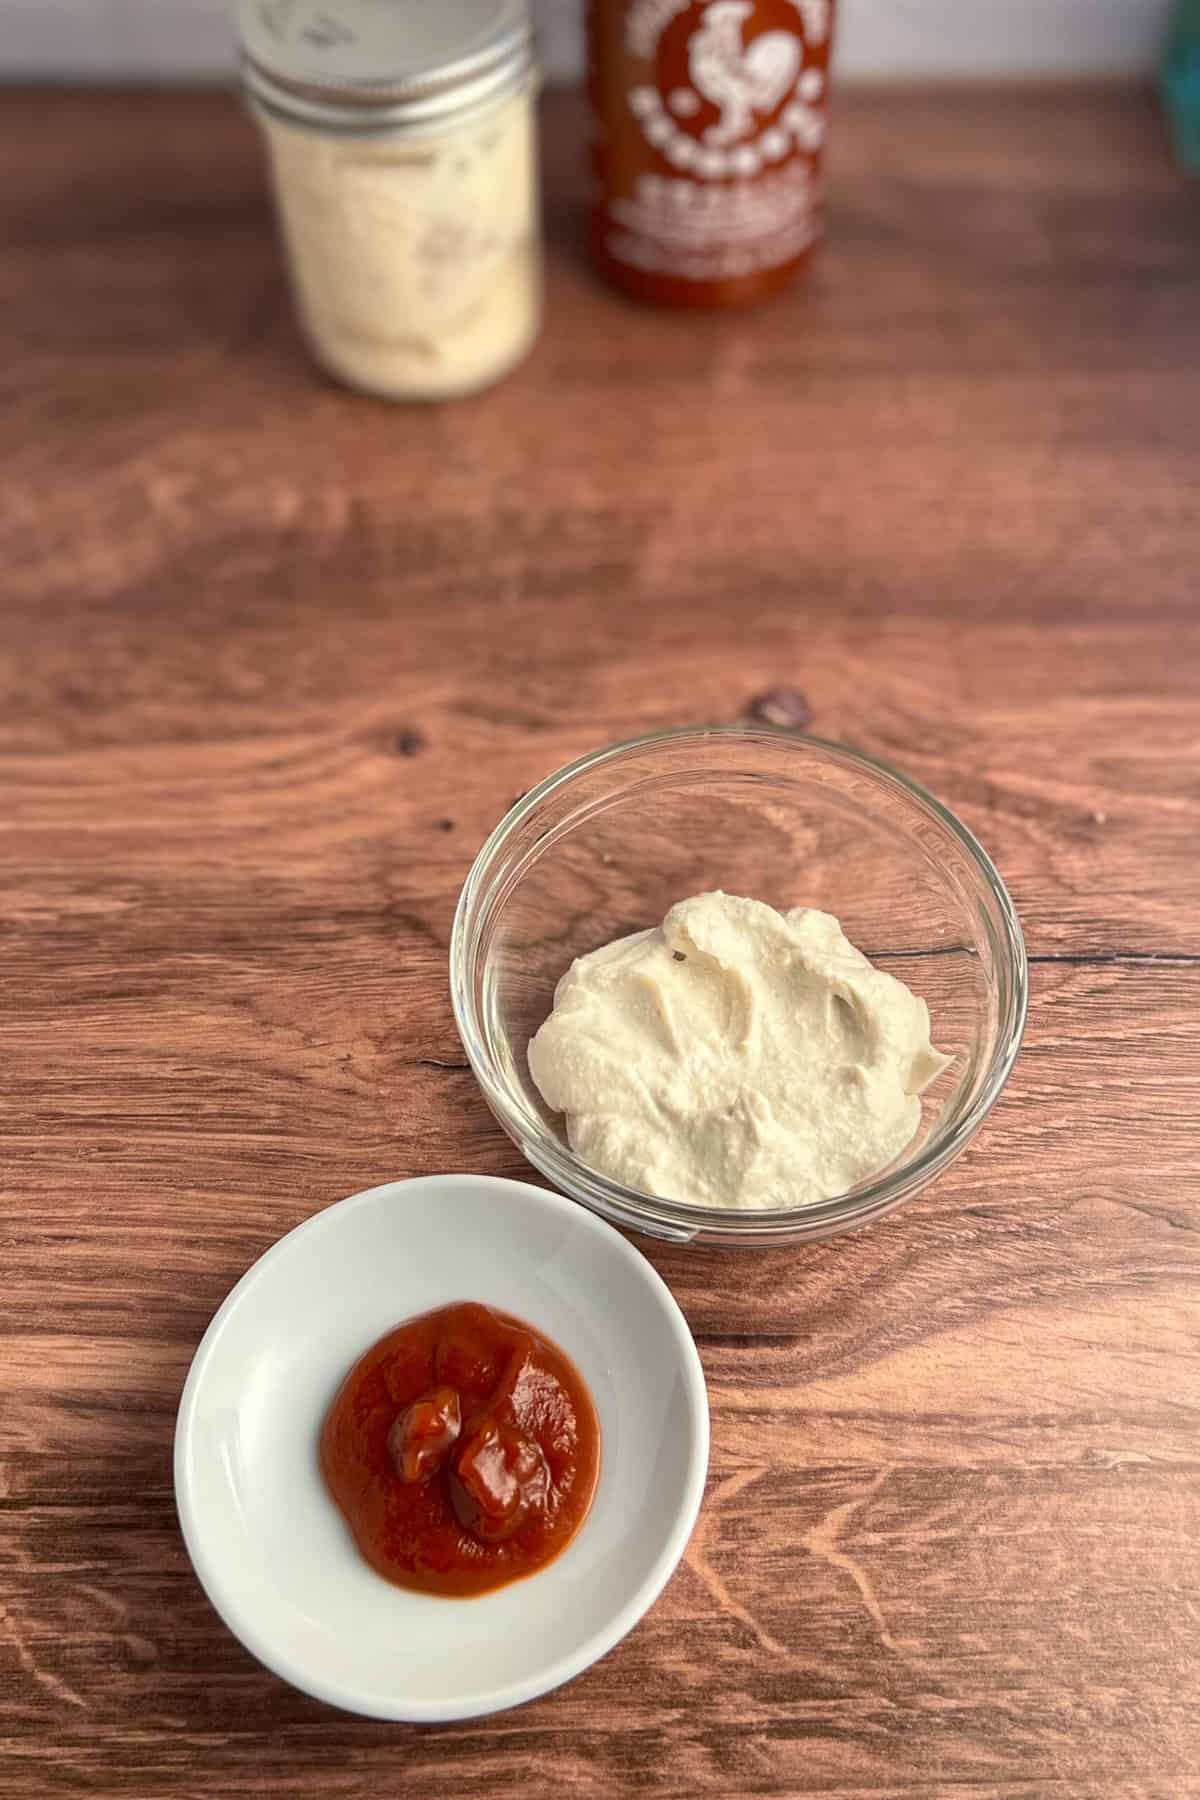 top side view of vegan mayo and sriracha against a wooden surface. mason jar with mayo and bottle of sriracha chili sauce blurred in the background.